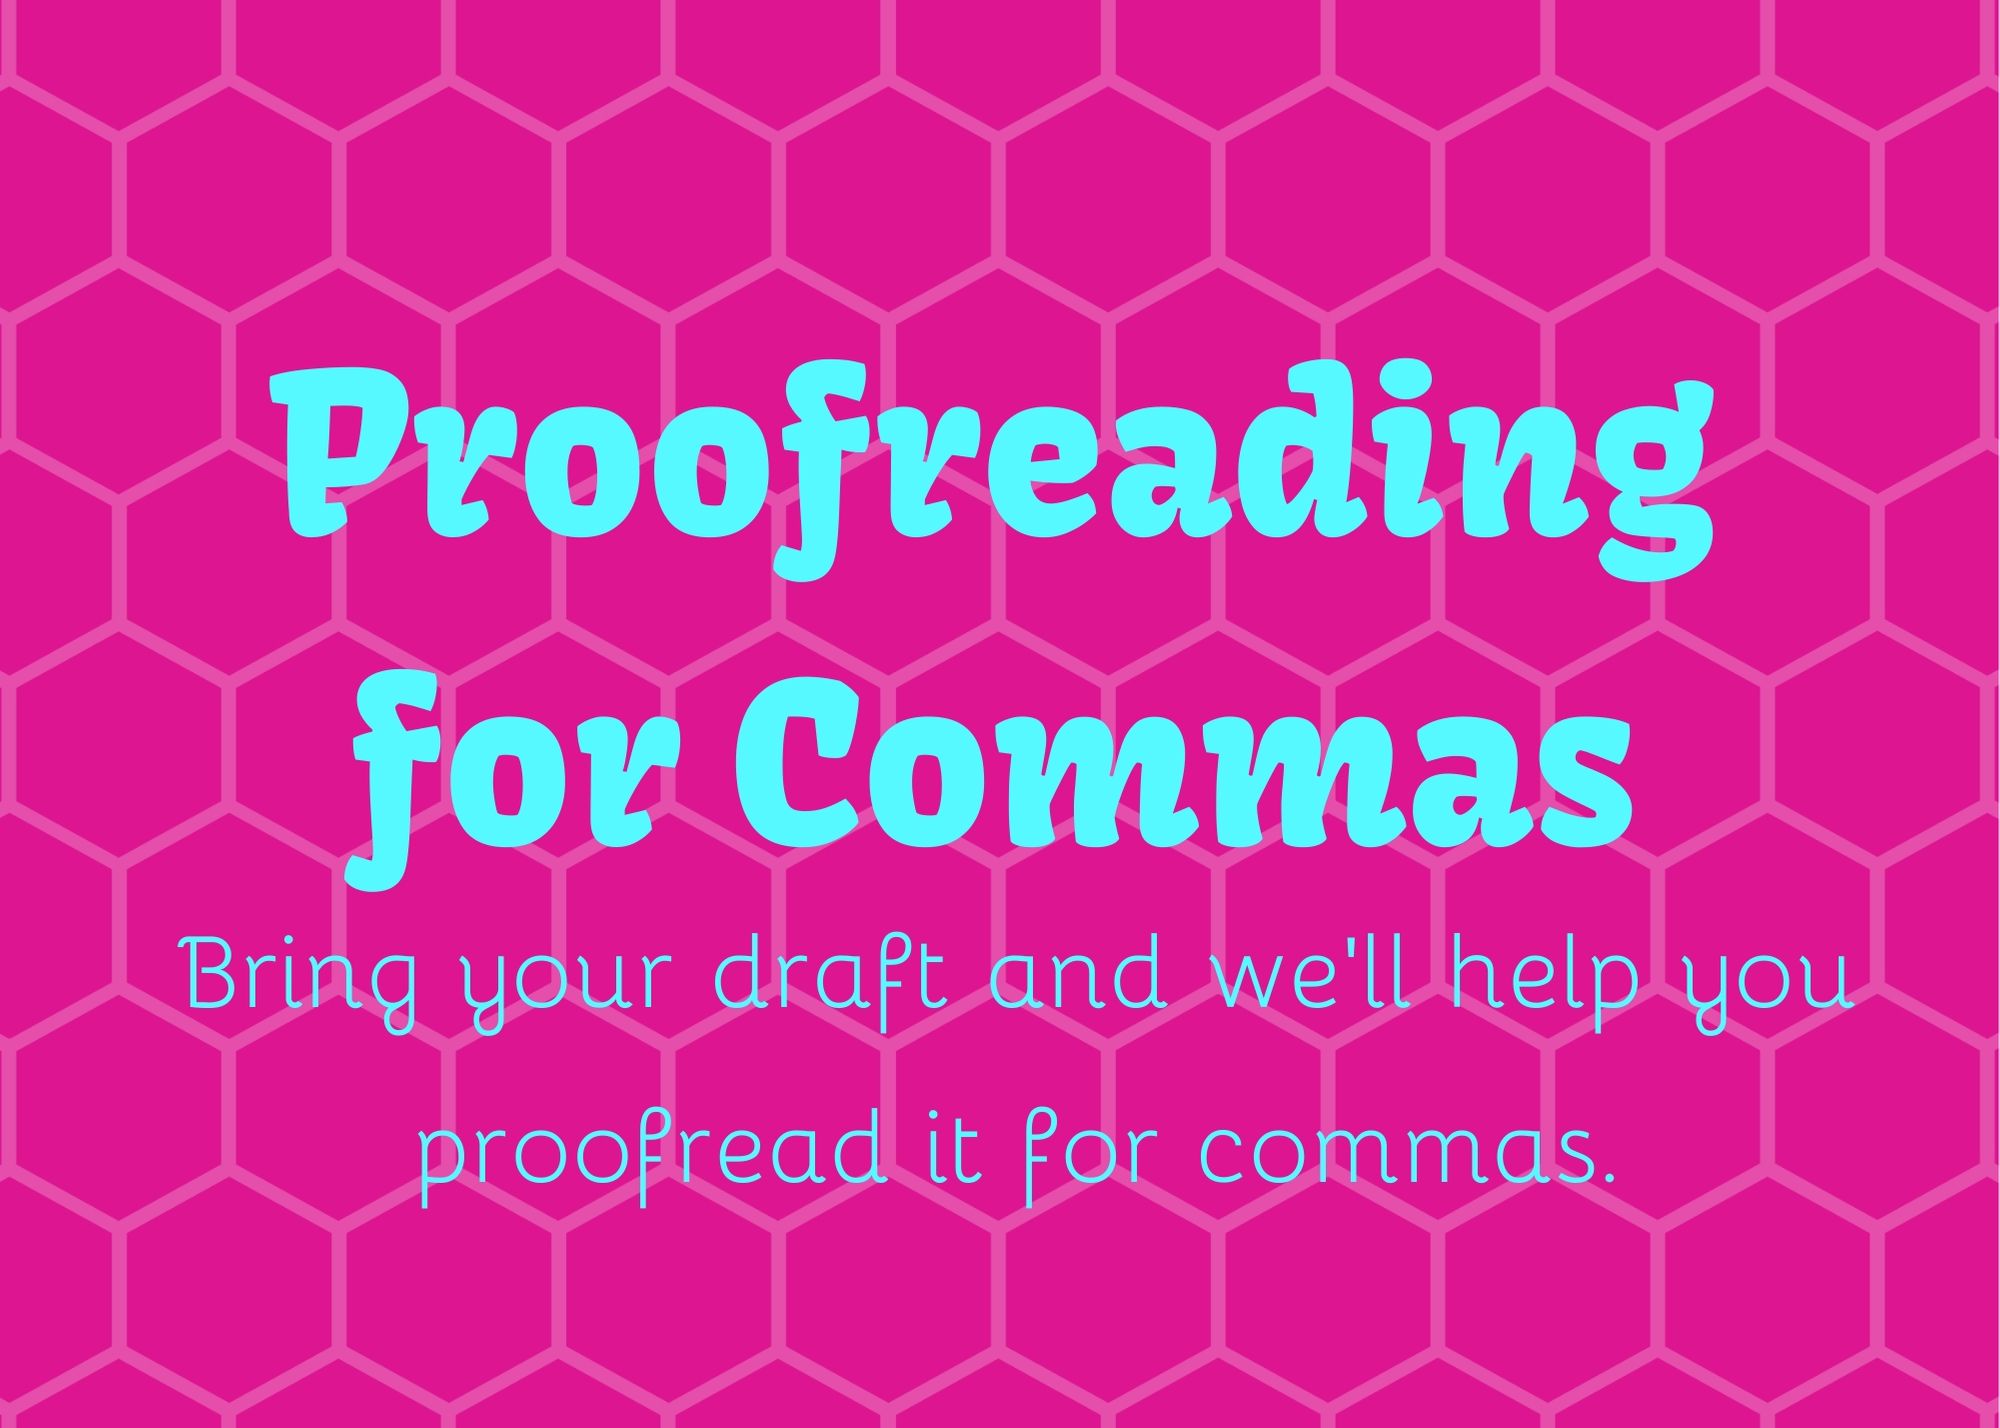 proofreading for commas